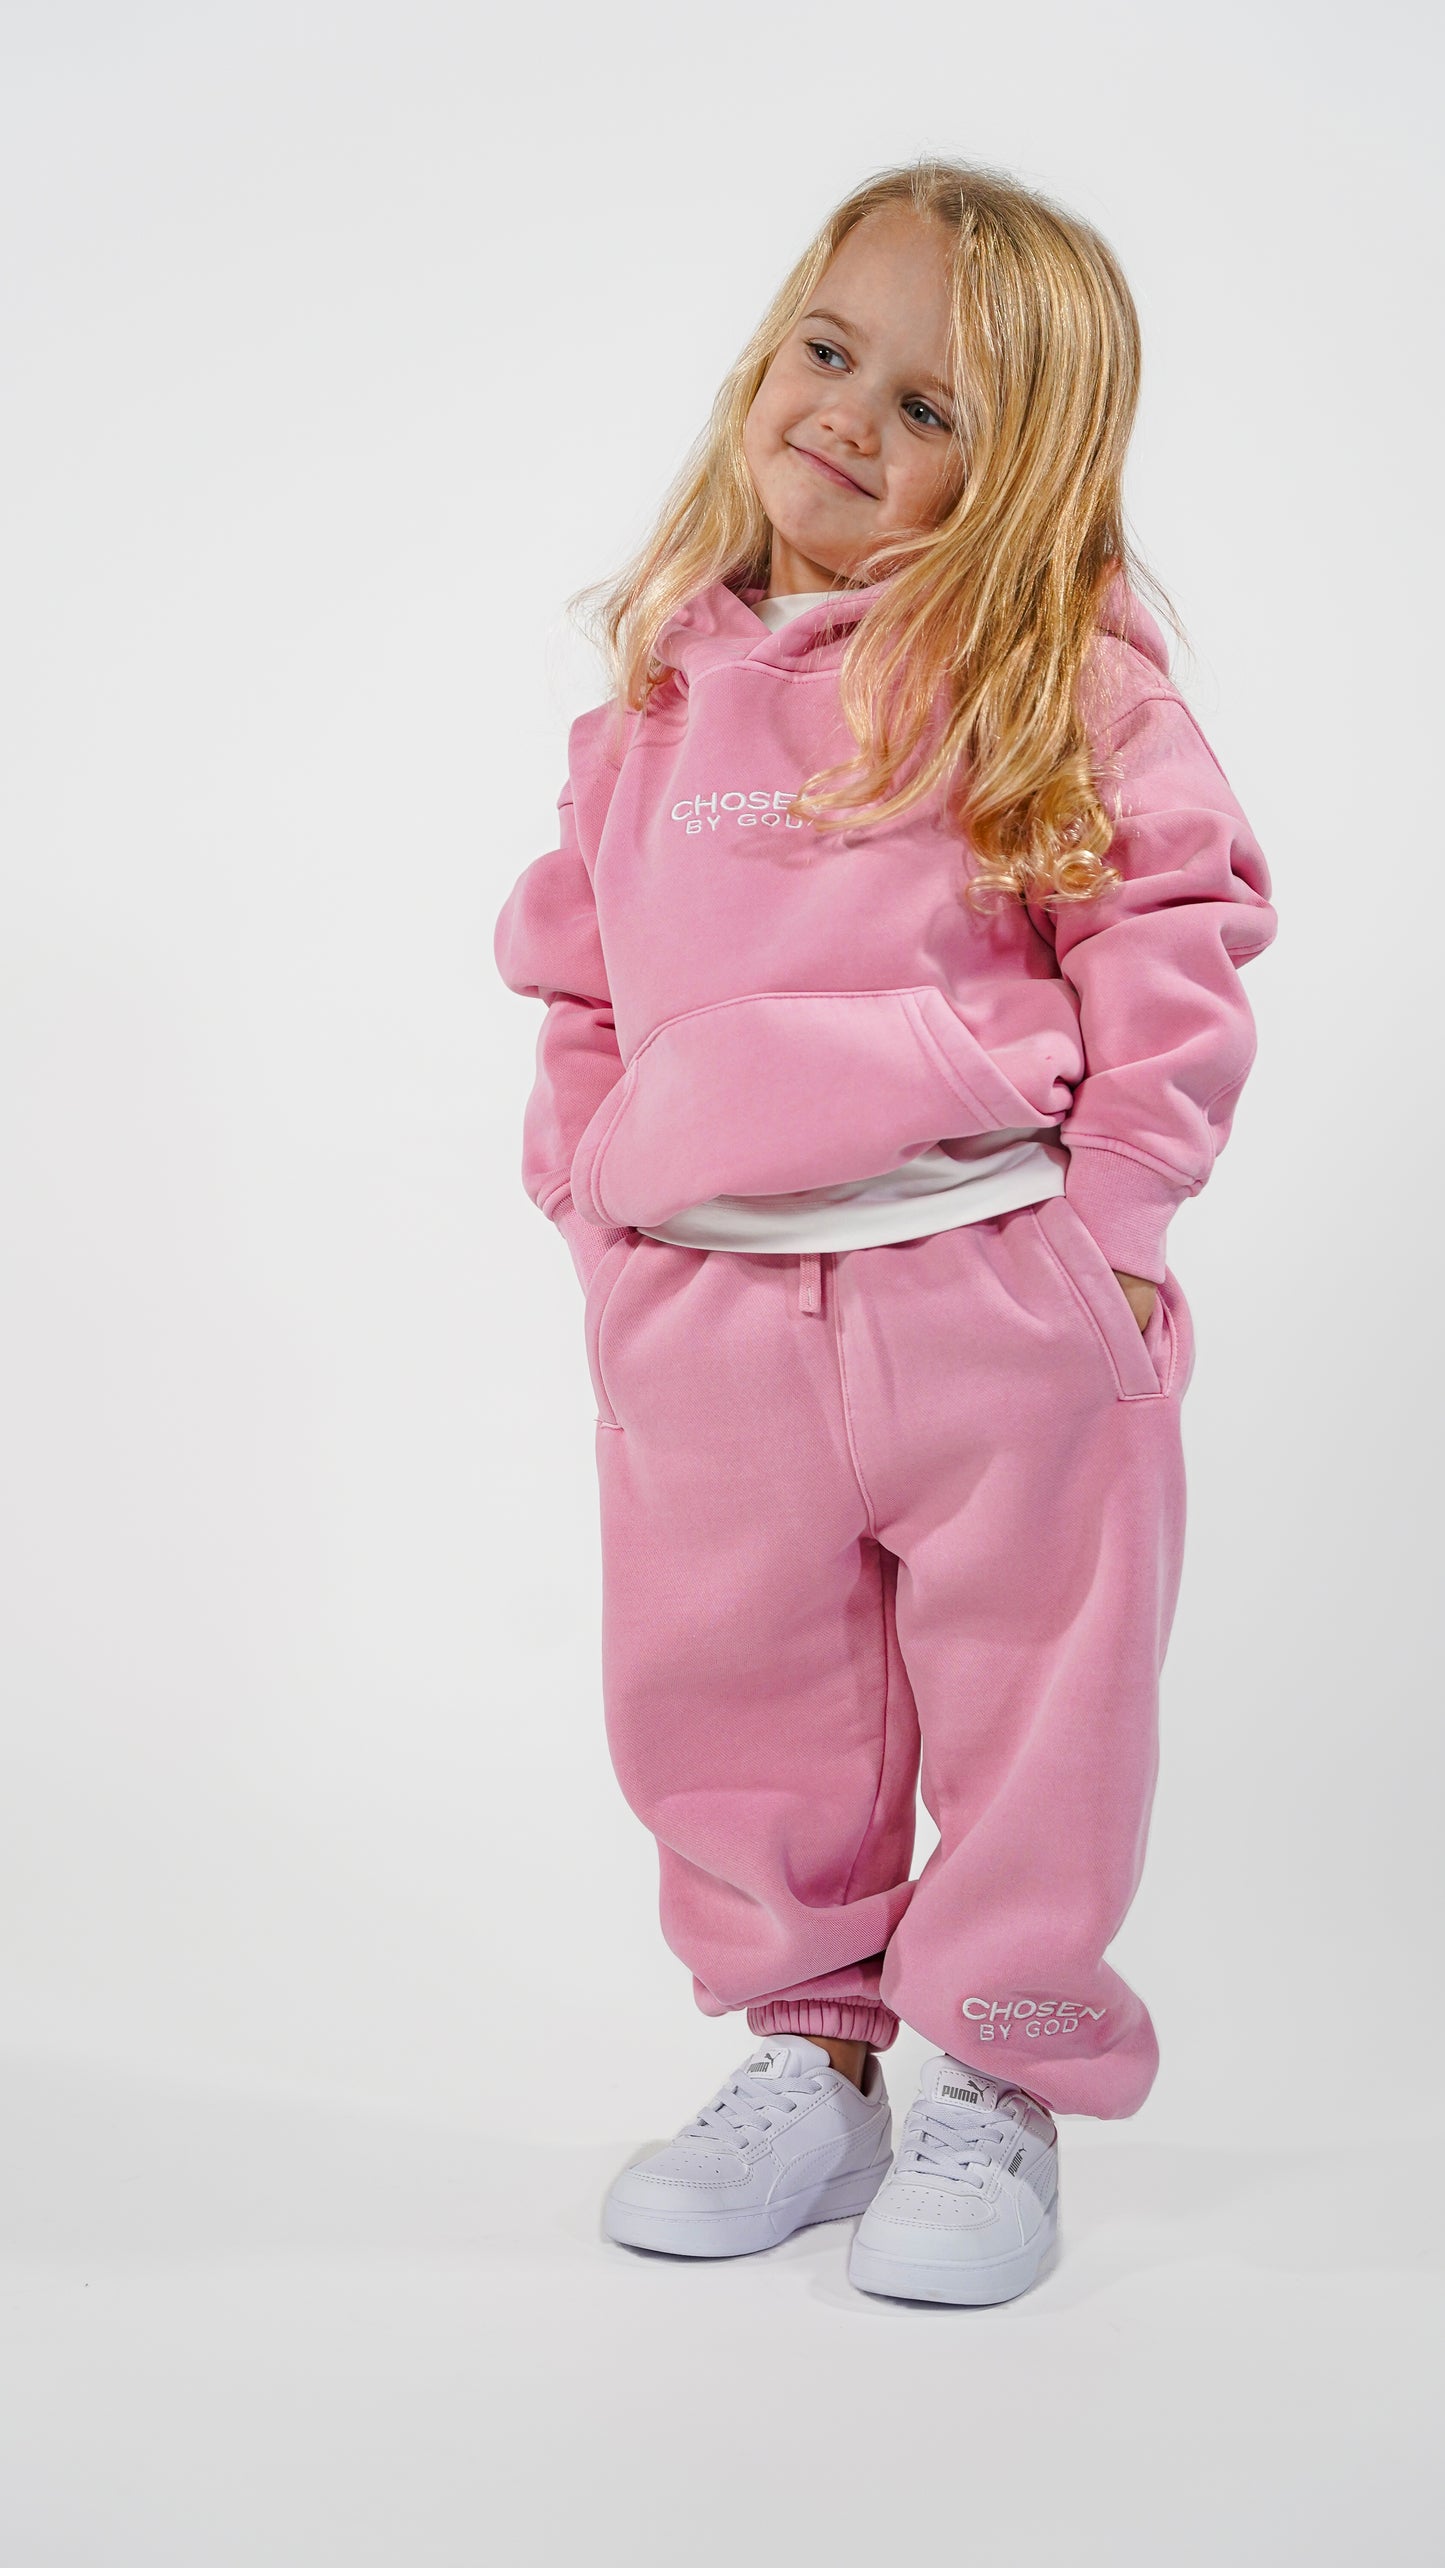 KIDS SUITS - PINK